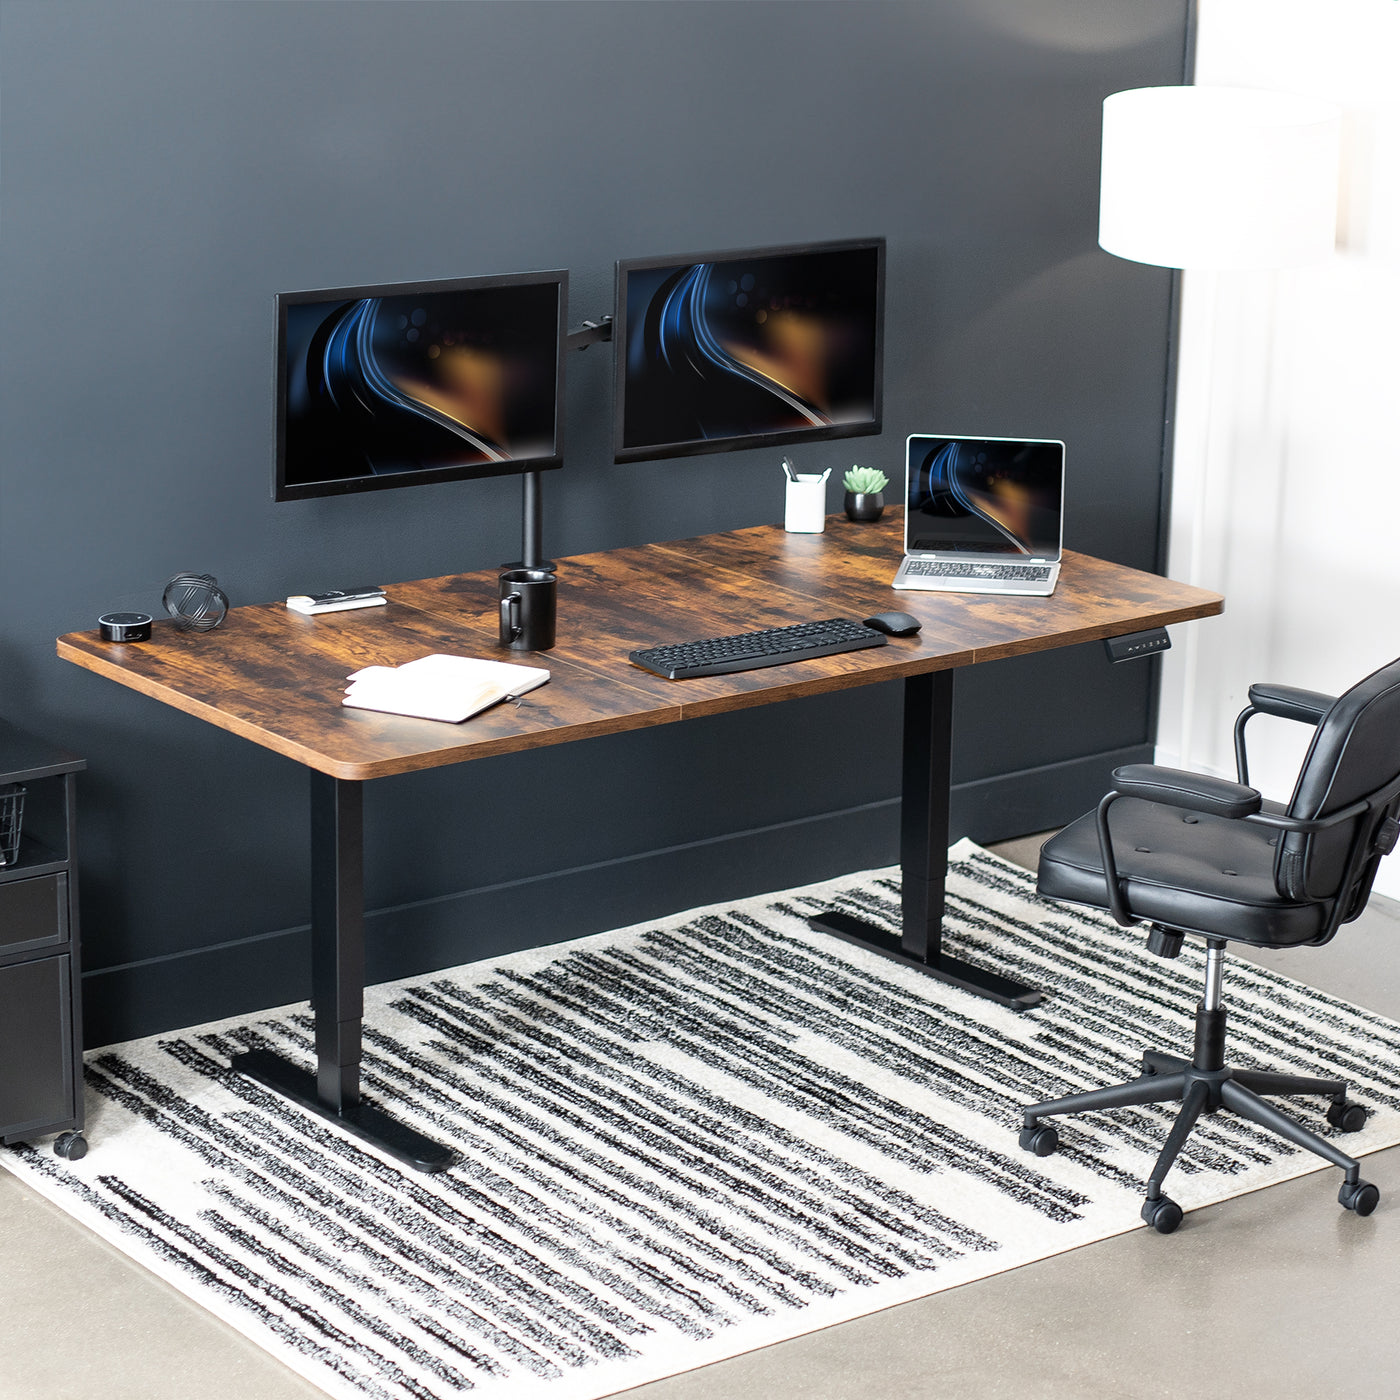 71" x 36" Rustic Electric Desk provides a convenient sit and stand workstation for the home or office.